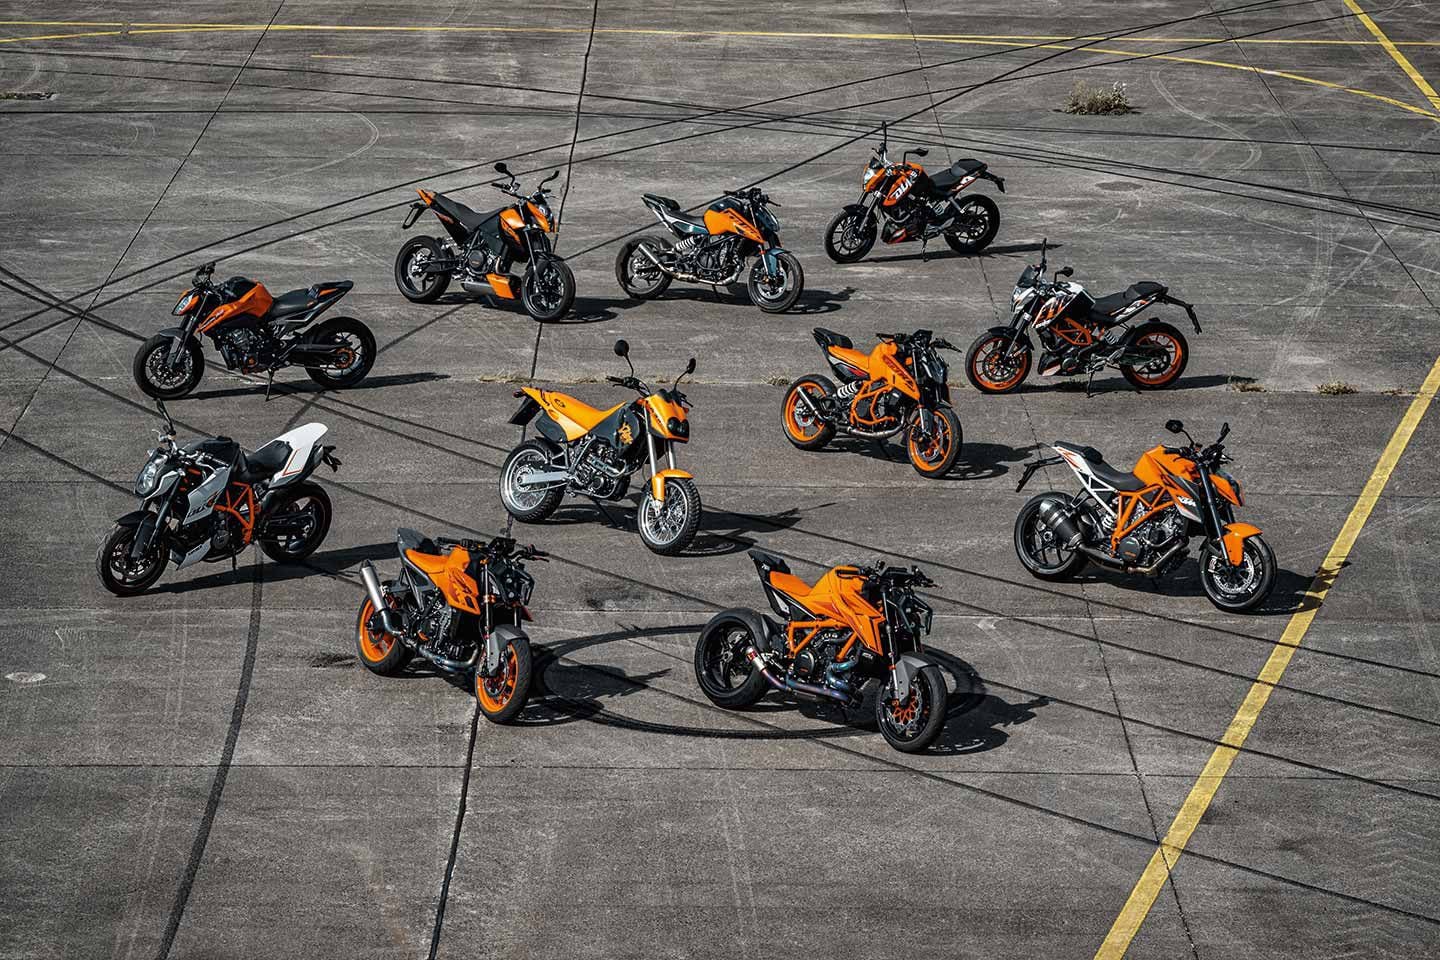 The 2024 Super Duke was launched as part of KTM’s “30 Years of Duke” celebration. The first Duke was built in 1994.